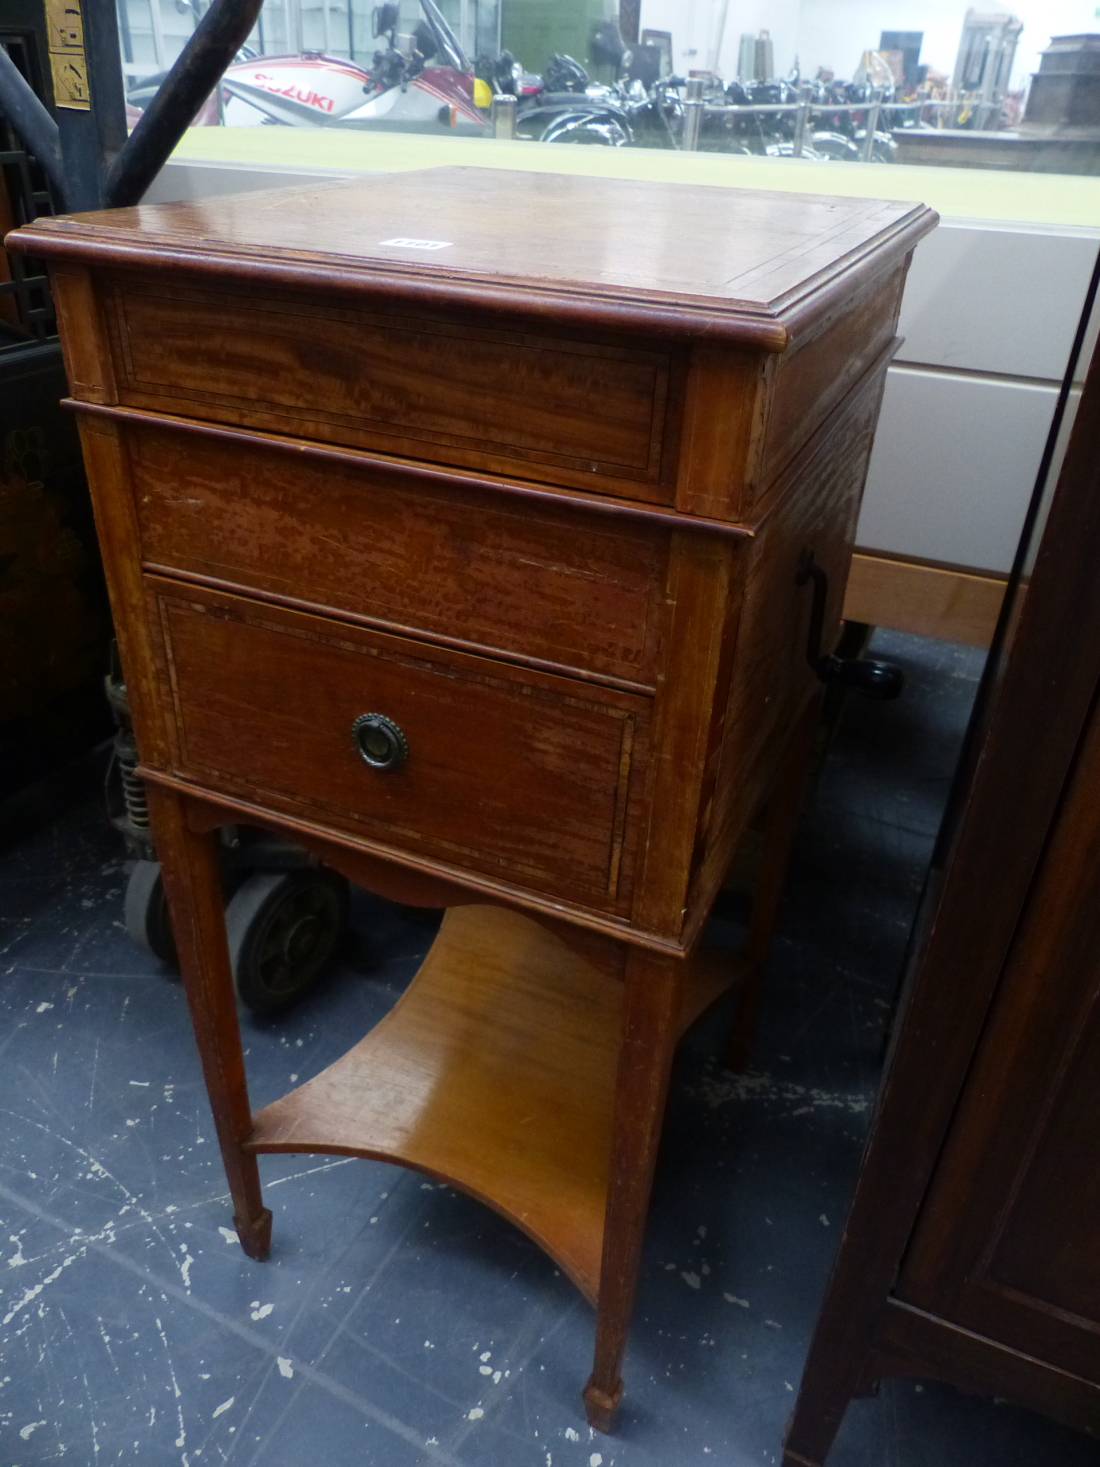 A GRAHAM ALGRAPHONE SALON WIND UP GRAMOPHONE IN BANDED SATINWOOD CASE WITH THE SOUND BOX BELOW THE